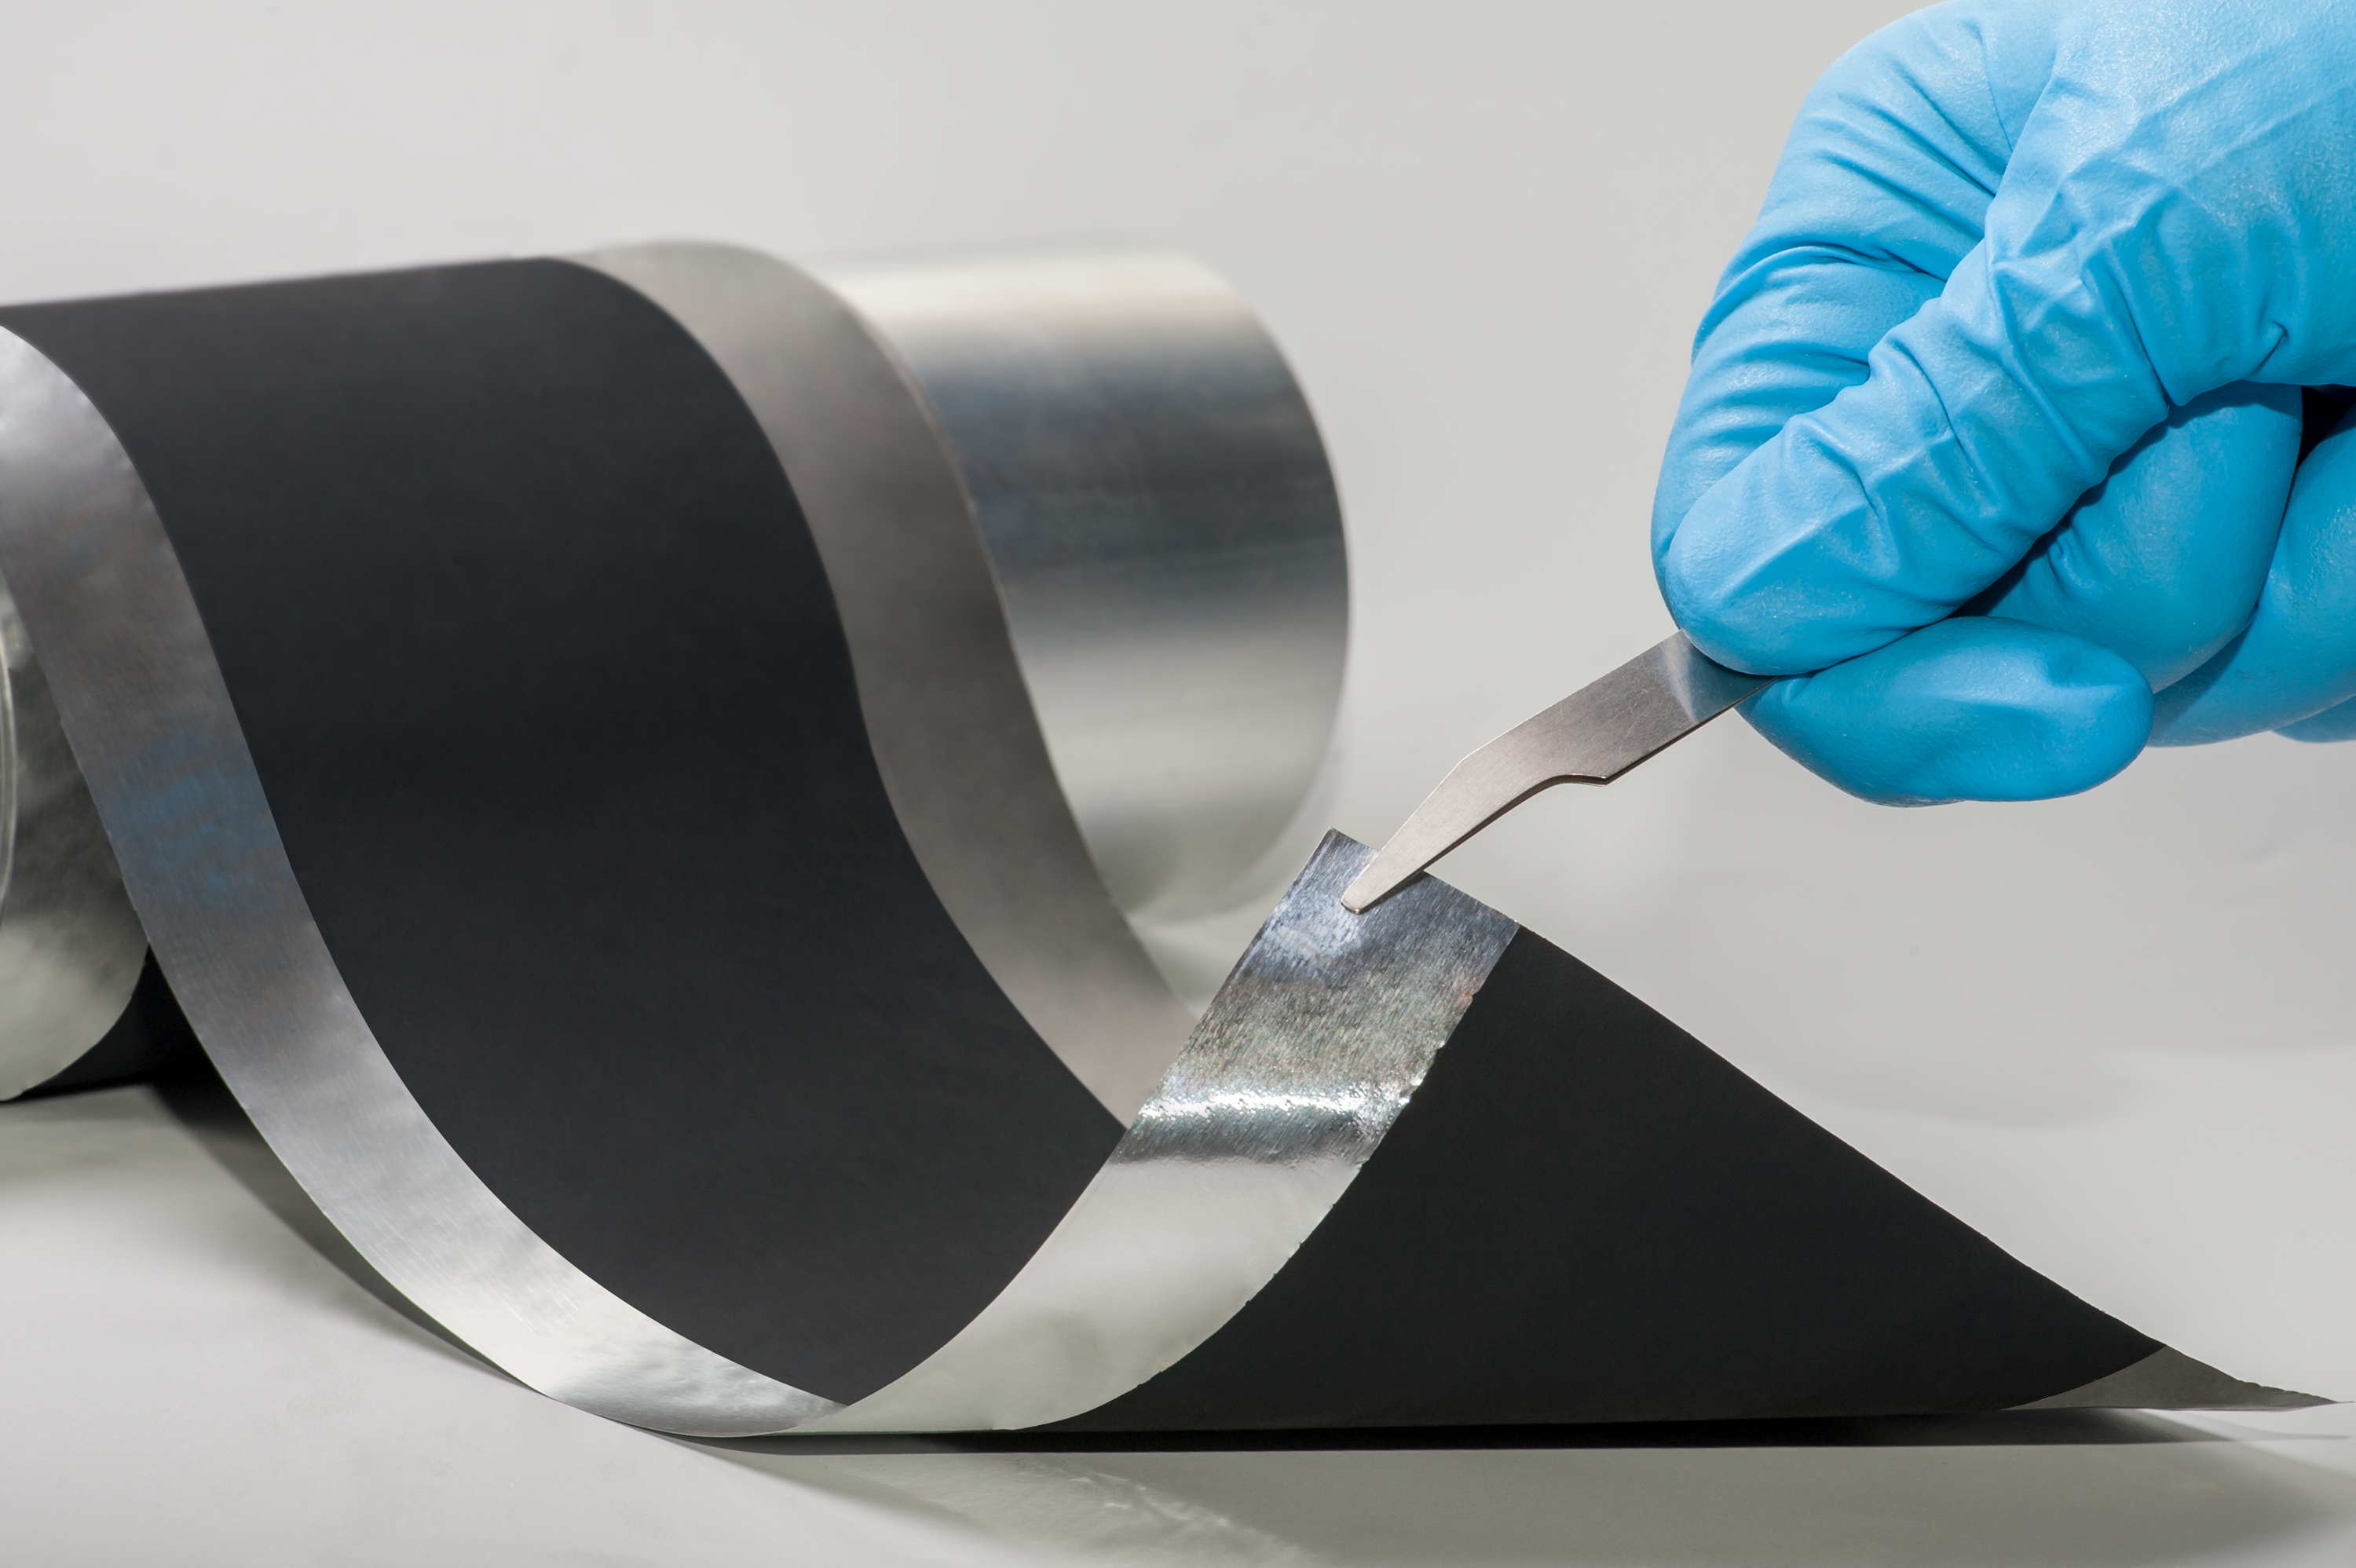 This is what the electrodes coated with the new dry transfer coating technology look like. Fraunhofer IWS process enables battery electrodes to be produced on a pilot scale without using toxic solvents.